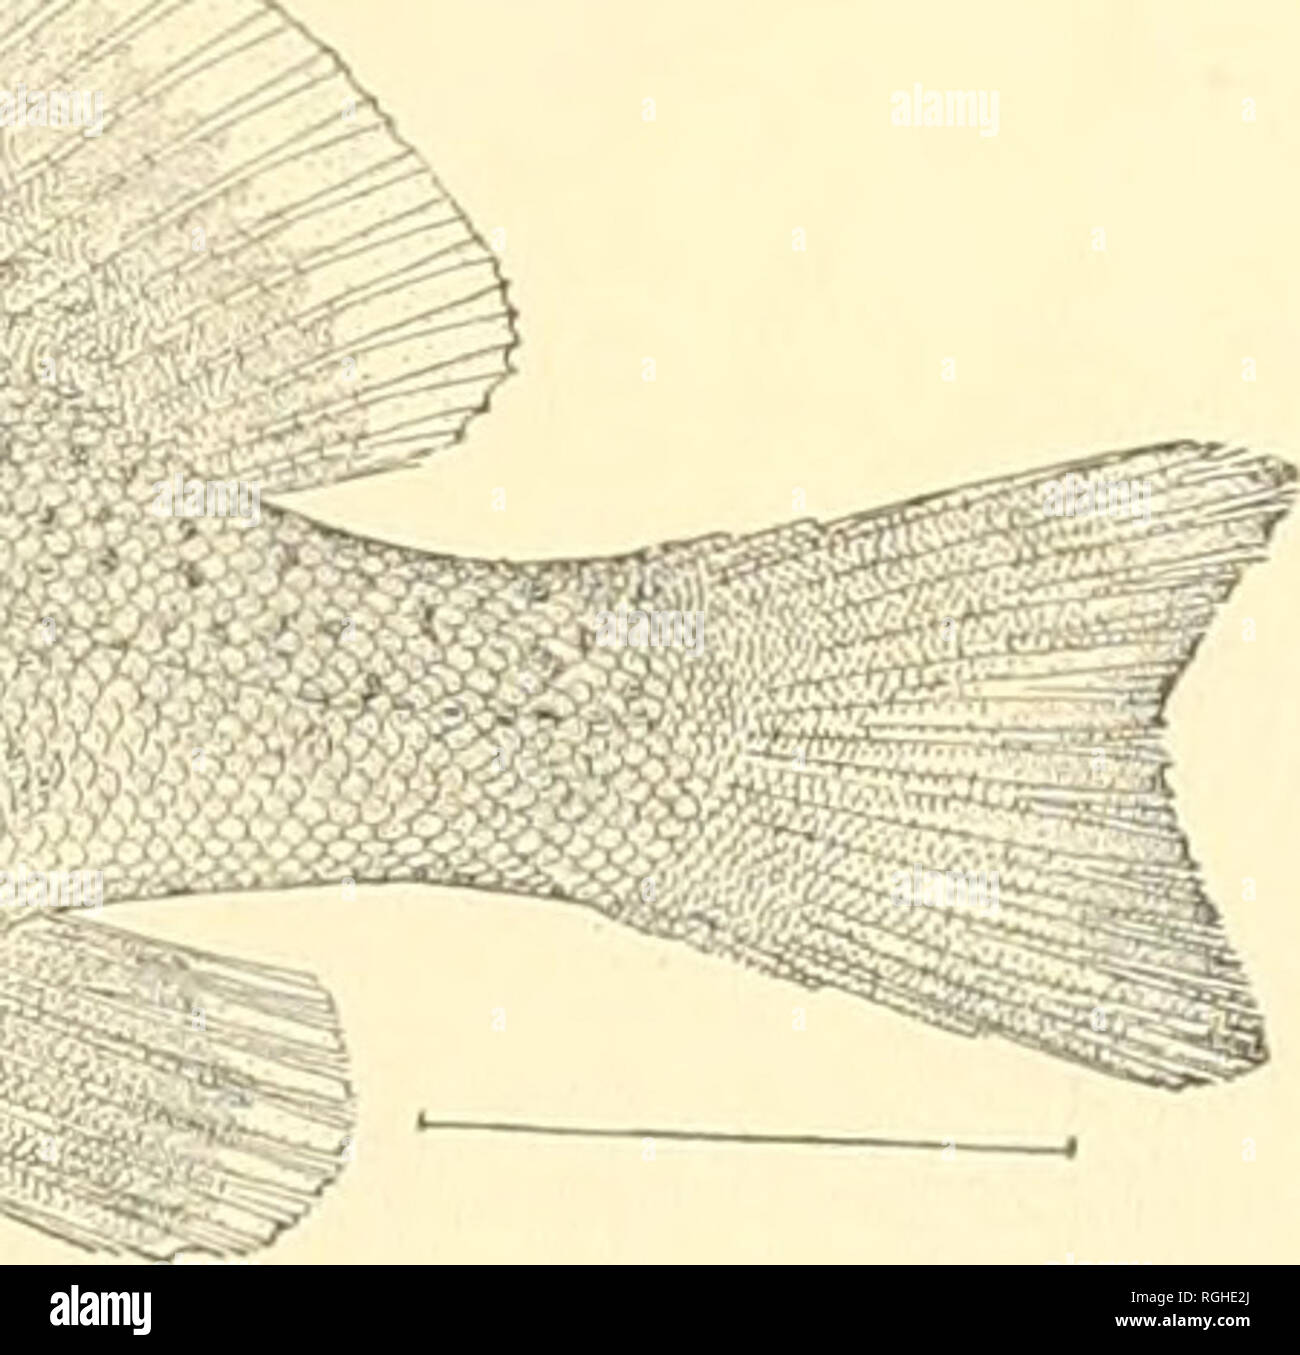 . Bulletin of the Bureau of Fisheries. Fisheries; Fish culture. M Fig. 31.—Sebastoflcs rili.atus (Tilesius). hy the Albatross in 1897 at Redfish Bay and Killisnoo. The species is now known from Kodiak Island, Aleutian Islands, Chignik Bay, Loring, Mary Island, Tolstoi Bay, Nakat Harbor, and Port Chester. As our 13-inch specimen is more than twice the size of those upon which current descriptions were based, we give the following notes on it; Head 3.2 in length; depth 2.8; oblique rows of scales GO, plus a few small scales on base of caudal fin; pores 50; eye 4 in head, equaling snout; interorb Stock Photo